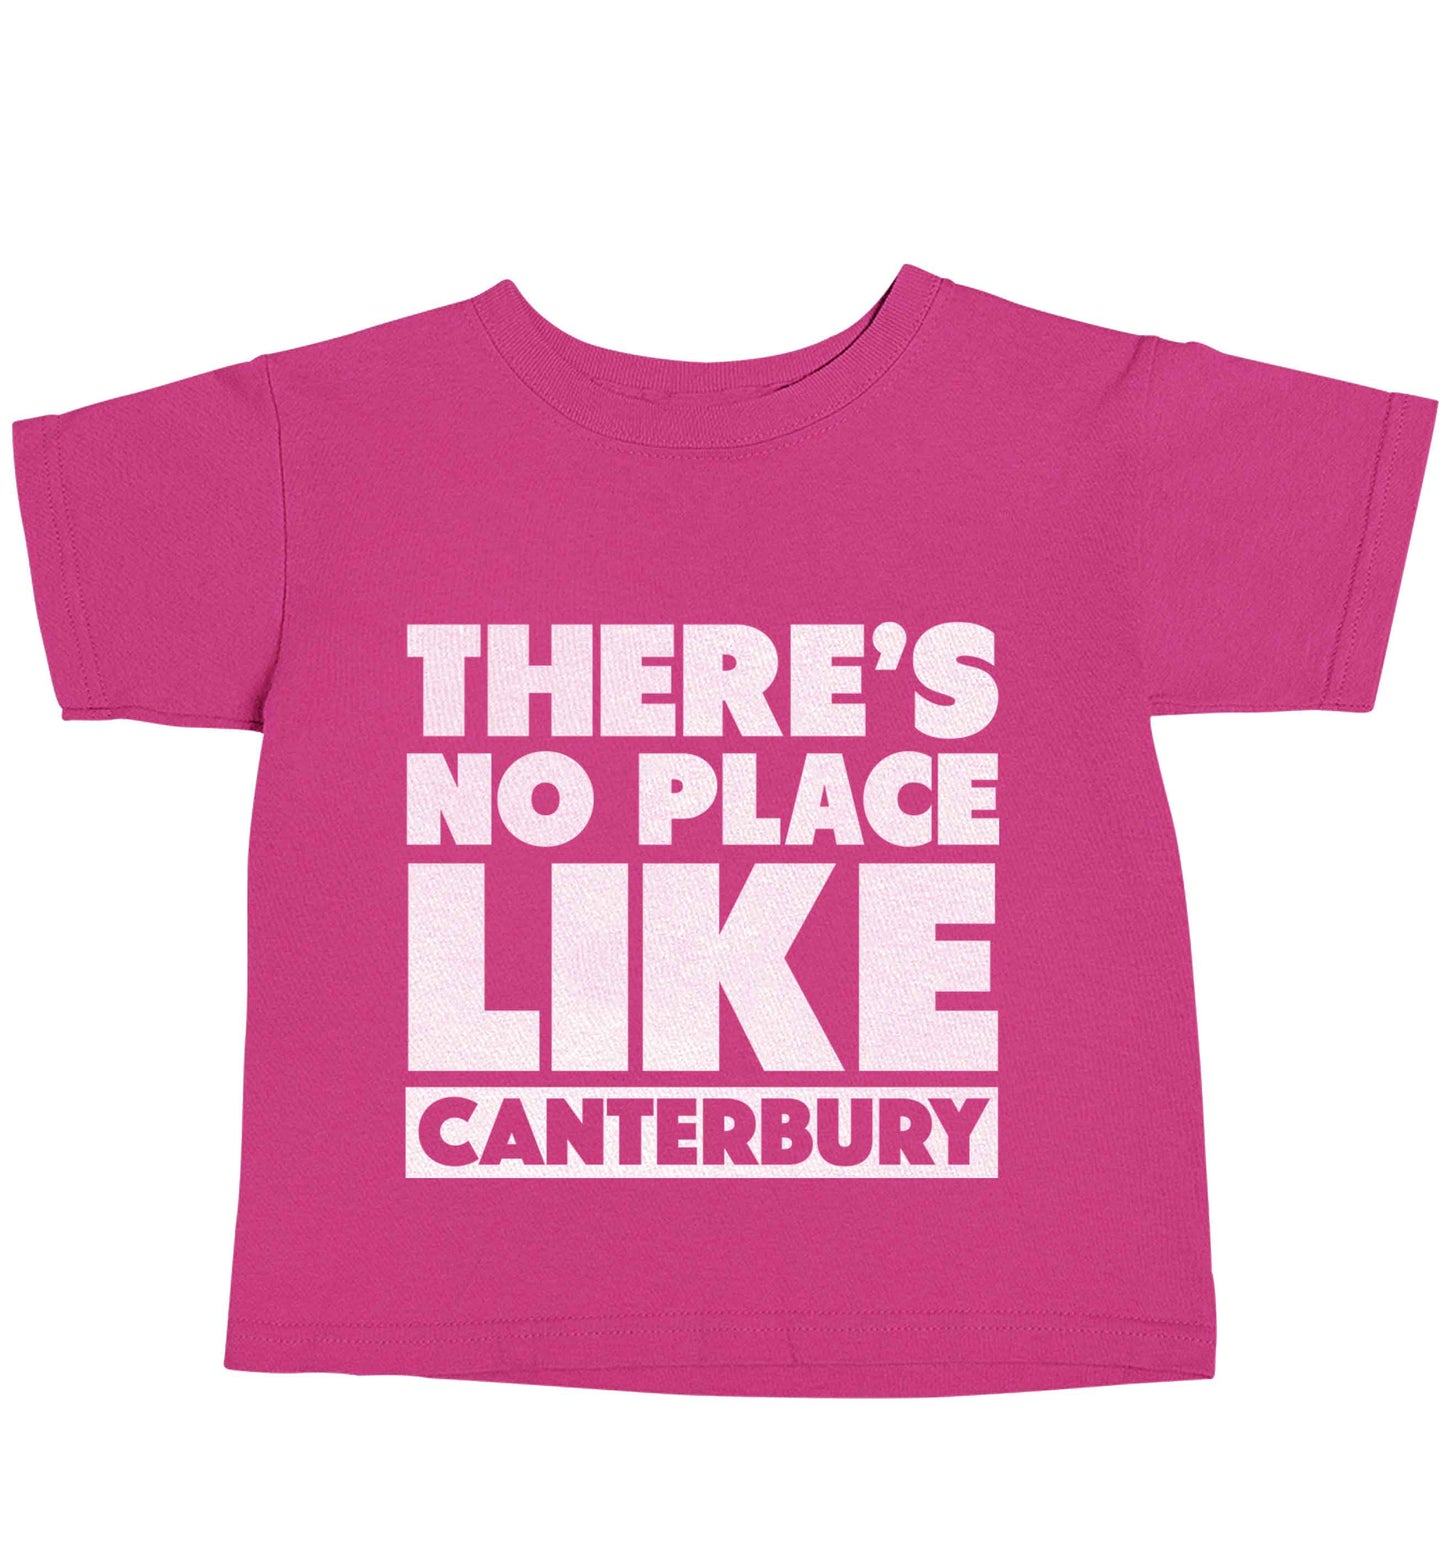 There's no place like Canterbury pink baby toddler Tshirt 2 Years